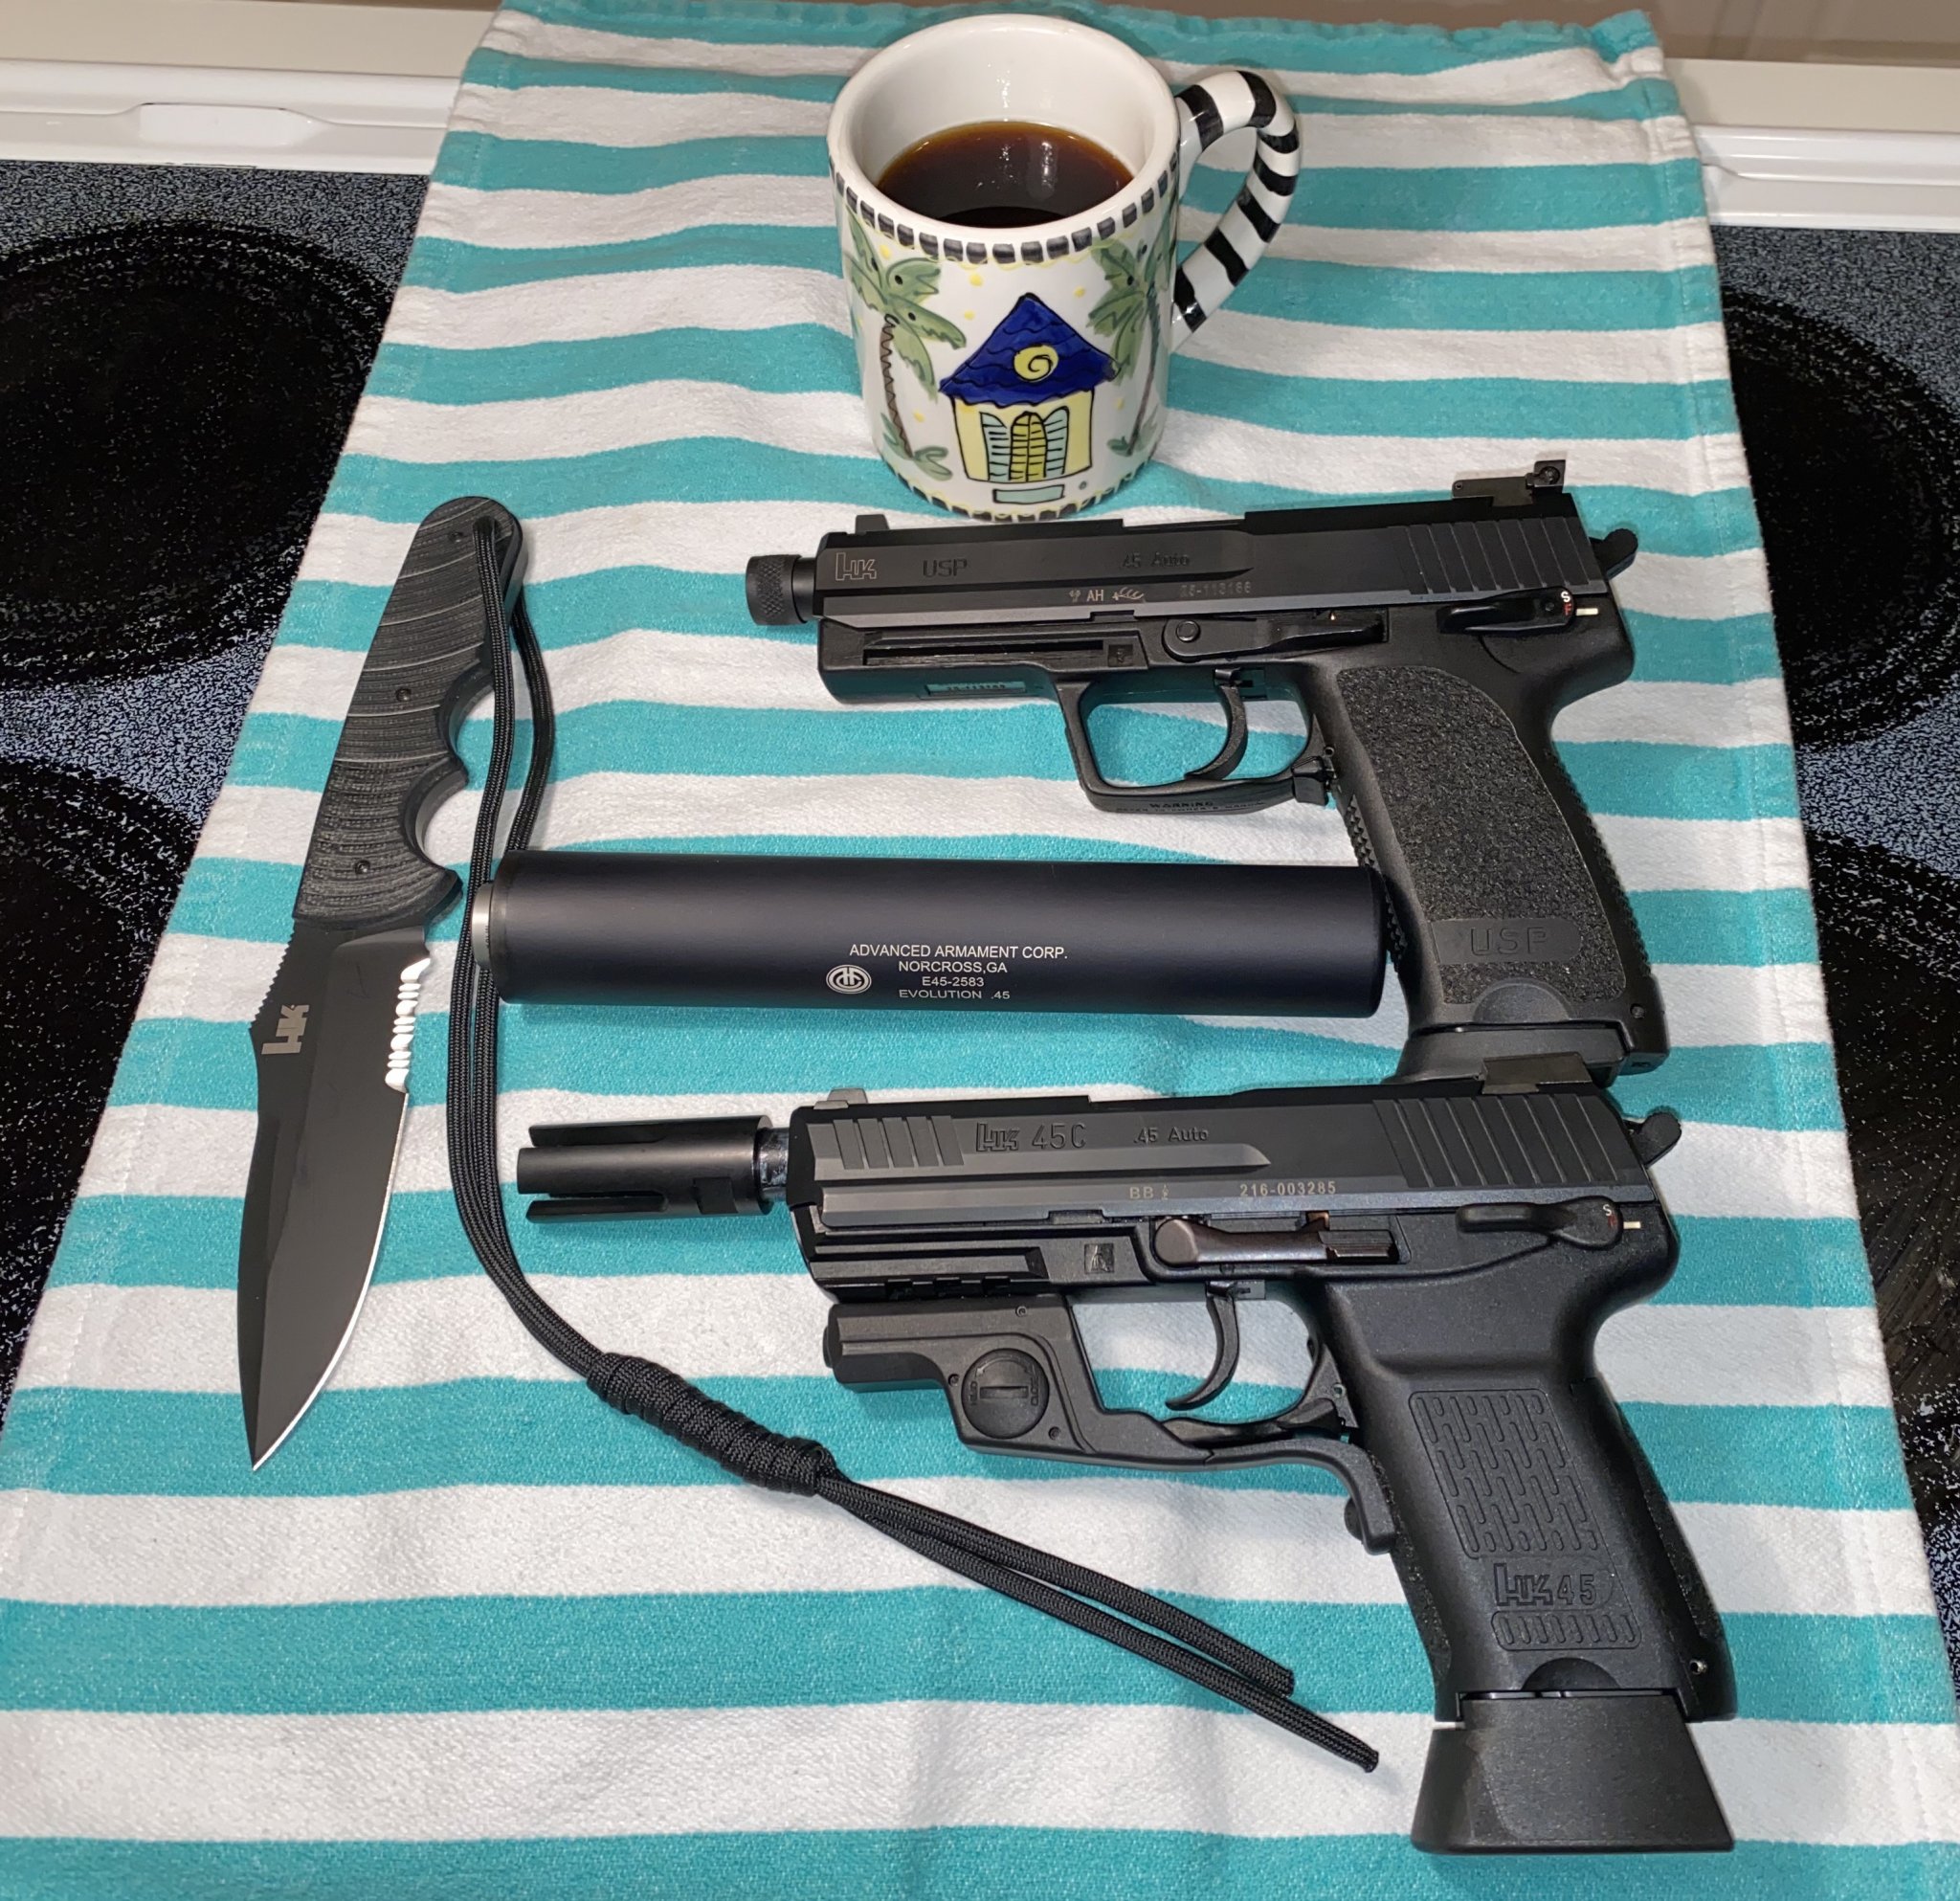 HK p30 VP9 Compact - USP .45 Tactical  Sig P229 Derivatives with Coffee Photos 2020IMG_7184 copy.jpg